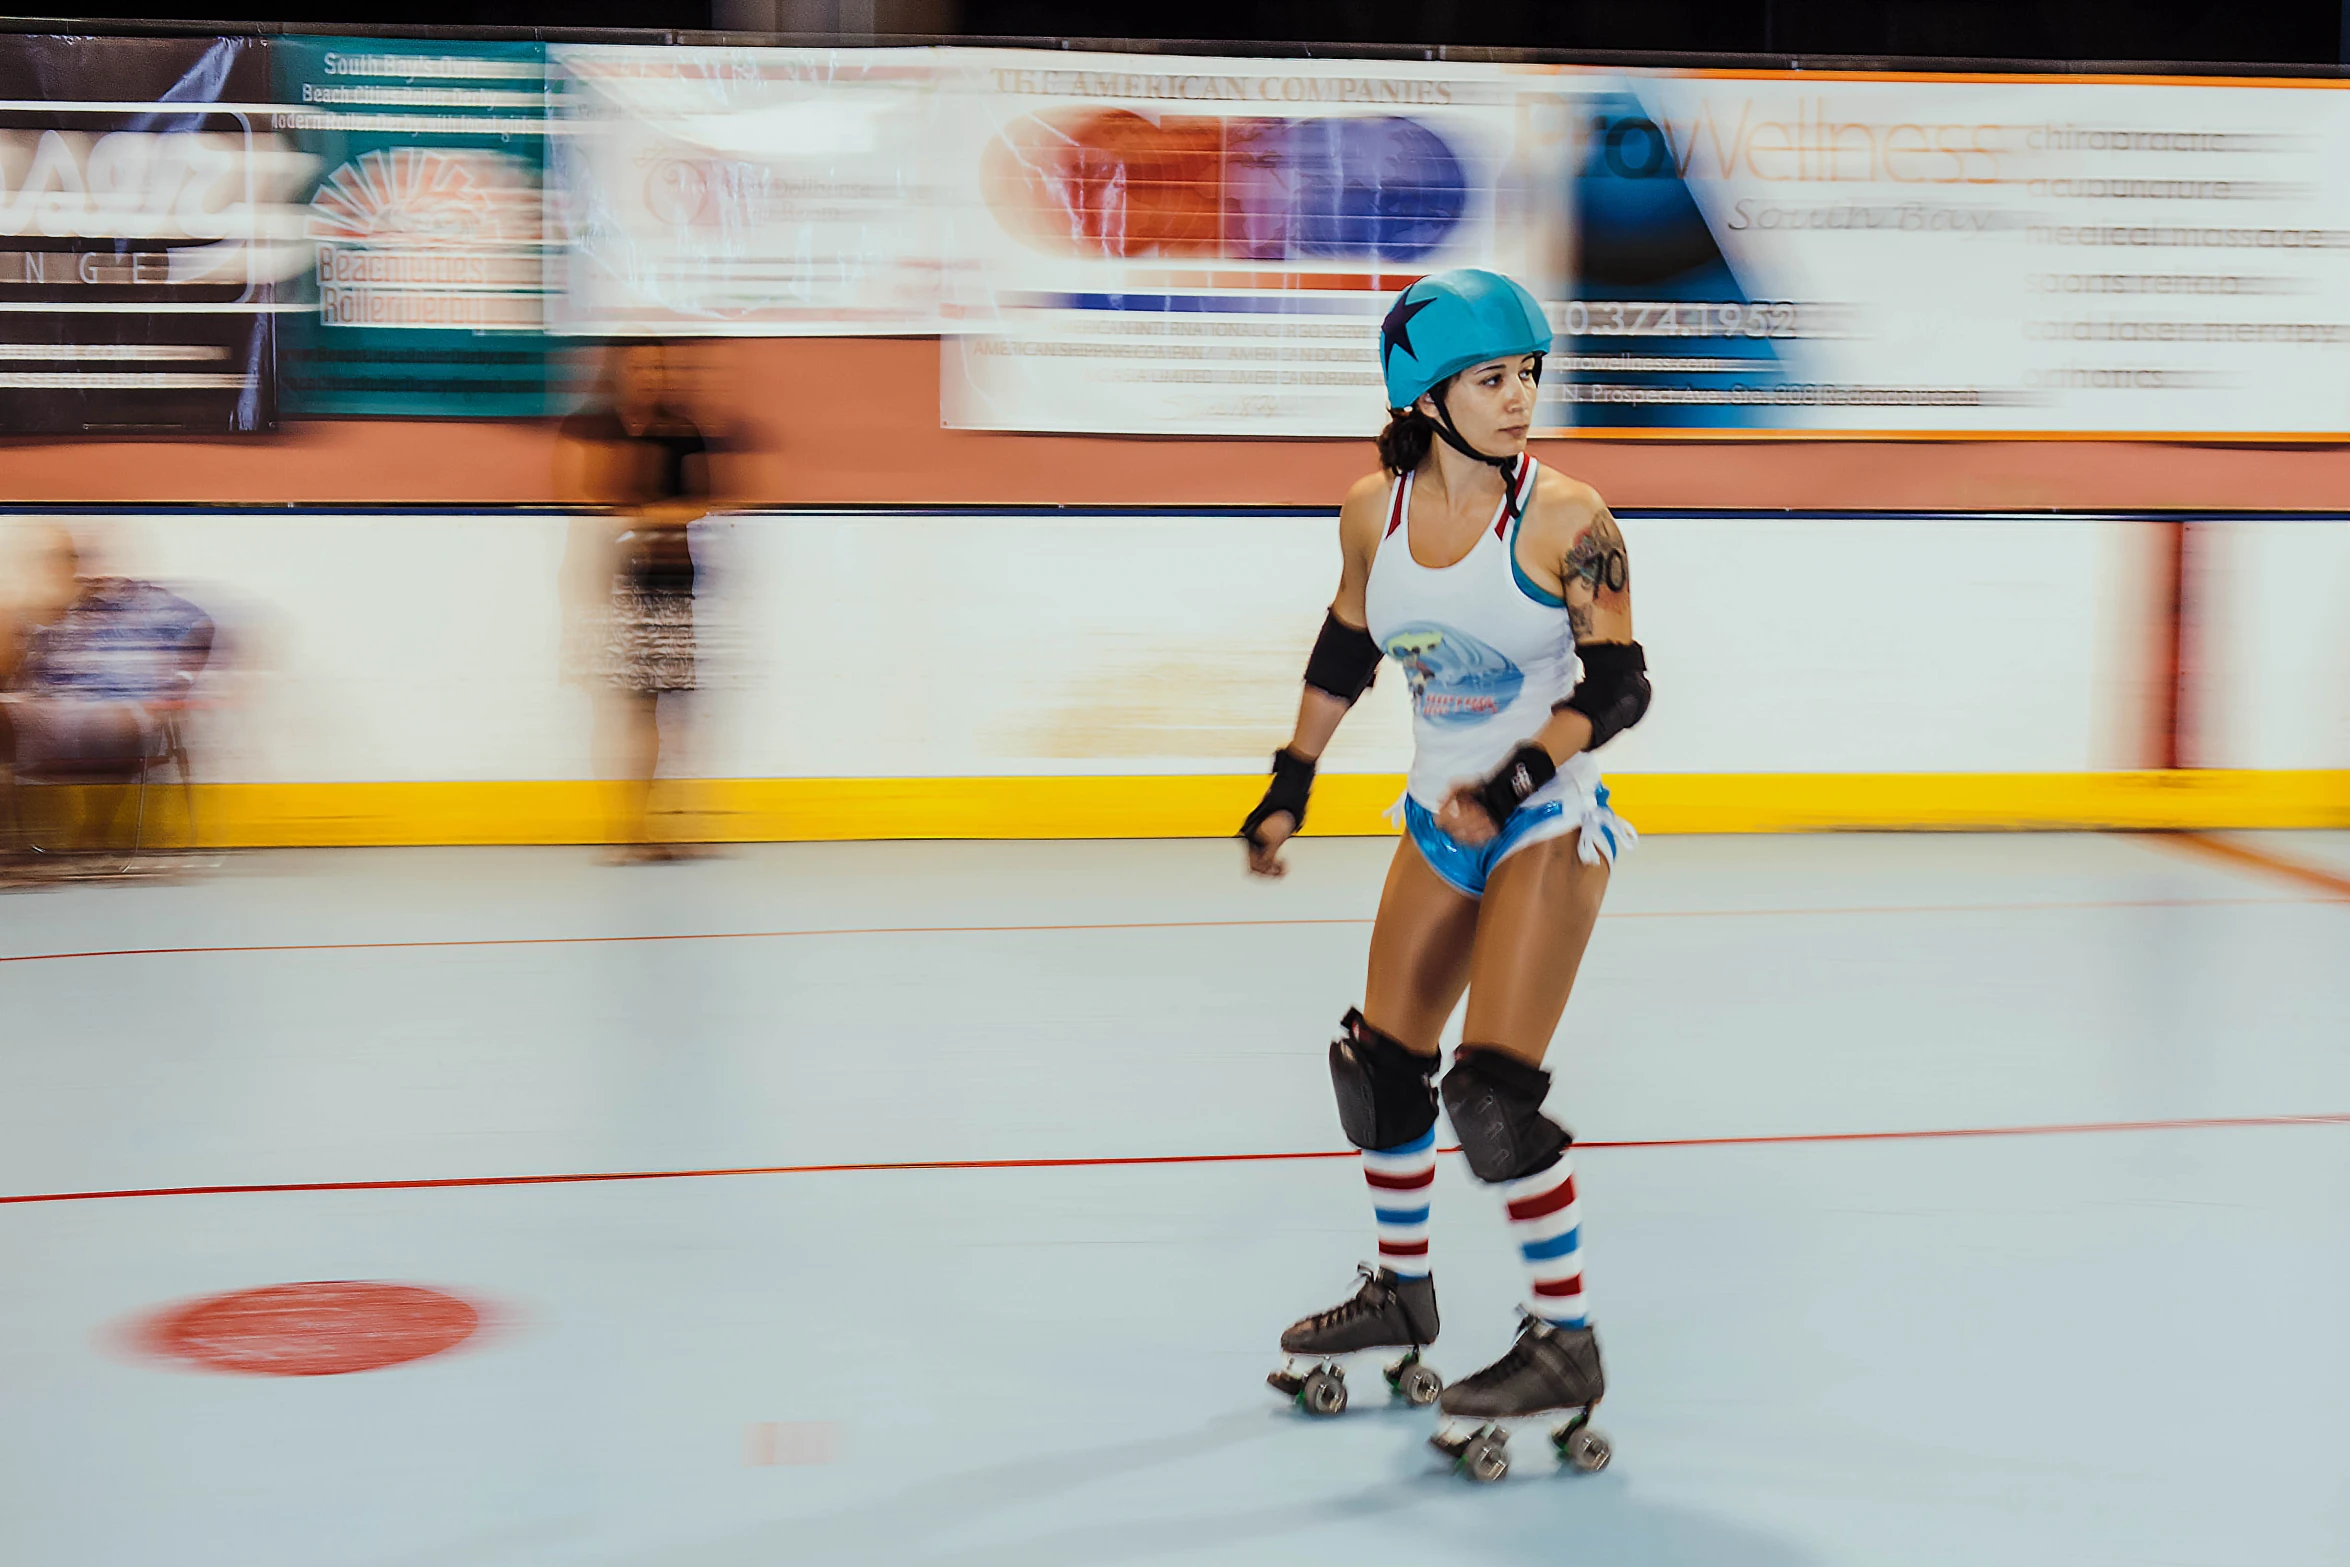 a woman on roller skates riding in an indoor rink